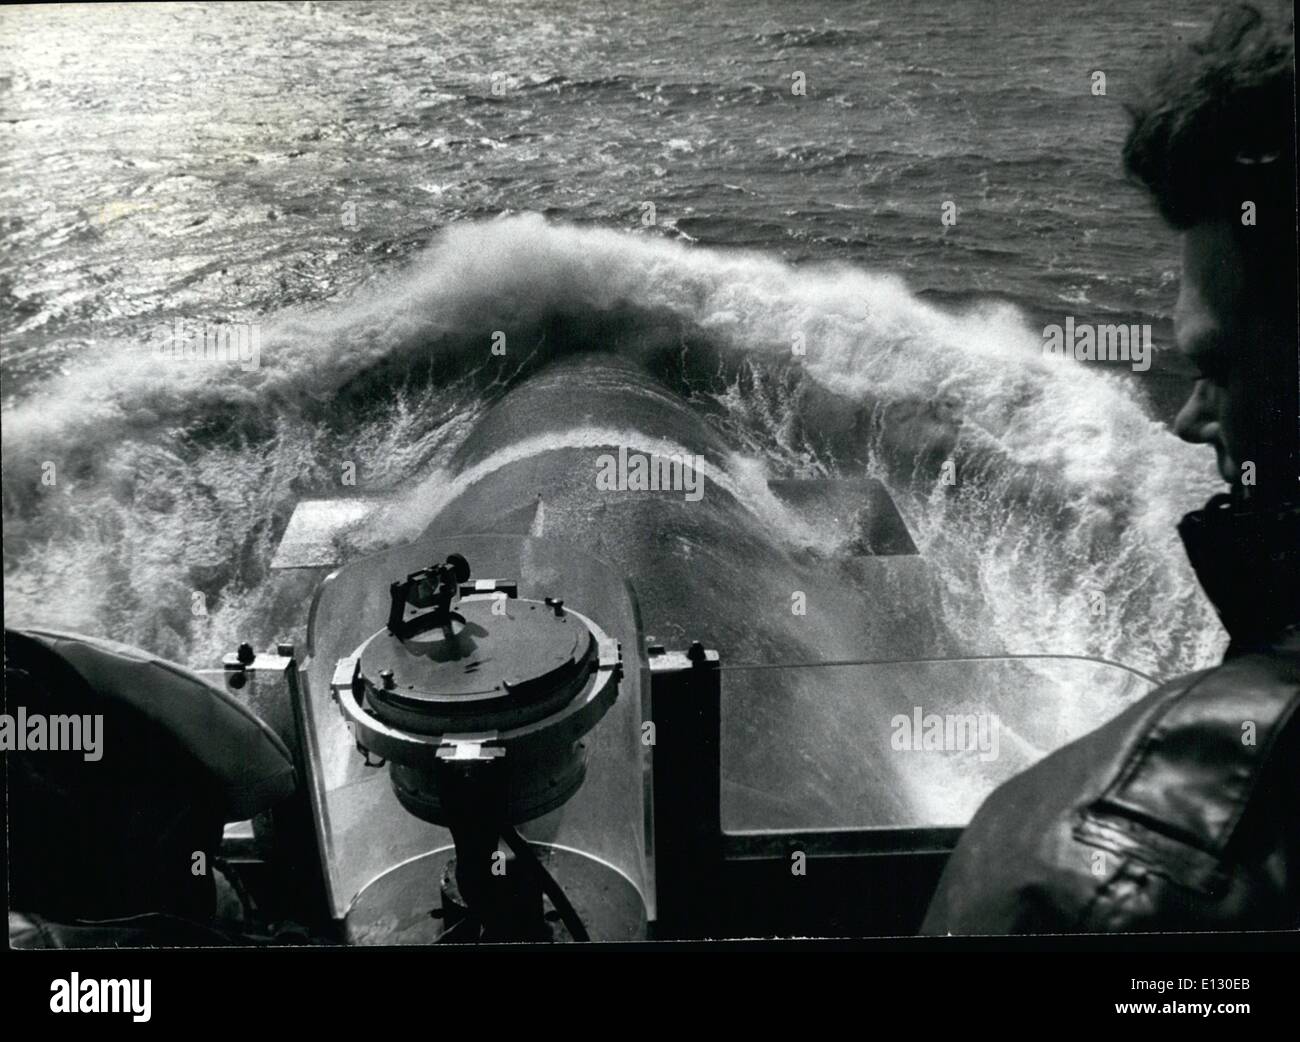 Feb. 26, 2012 - Photo shows The hydroplane fins out through the water as the ''Dreadnought'' steams down the channel, note the navigational equipment used for ''Fixing'' the submarine. Stock Photo